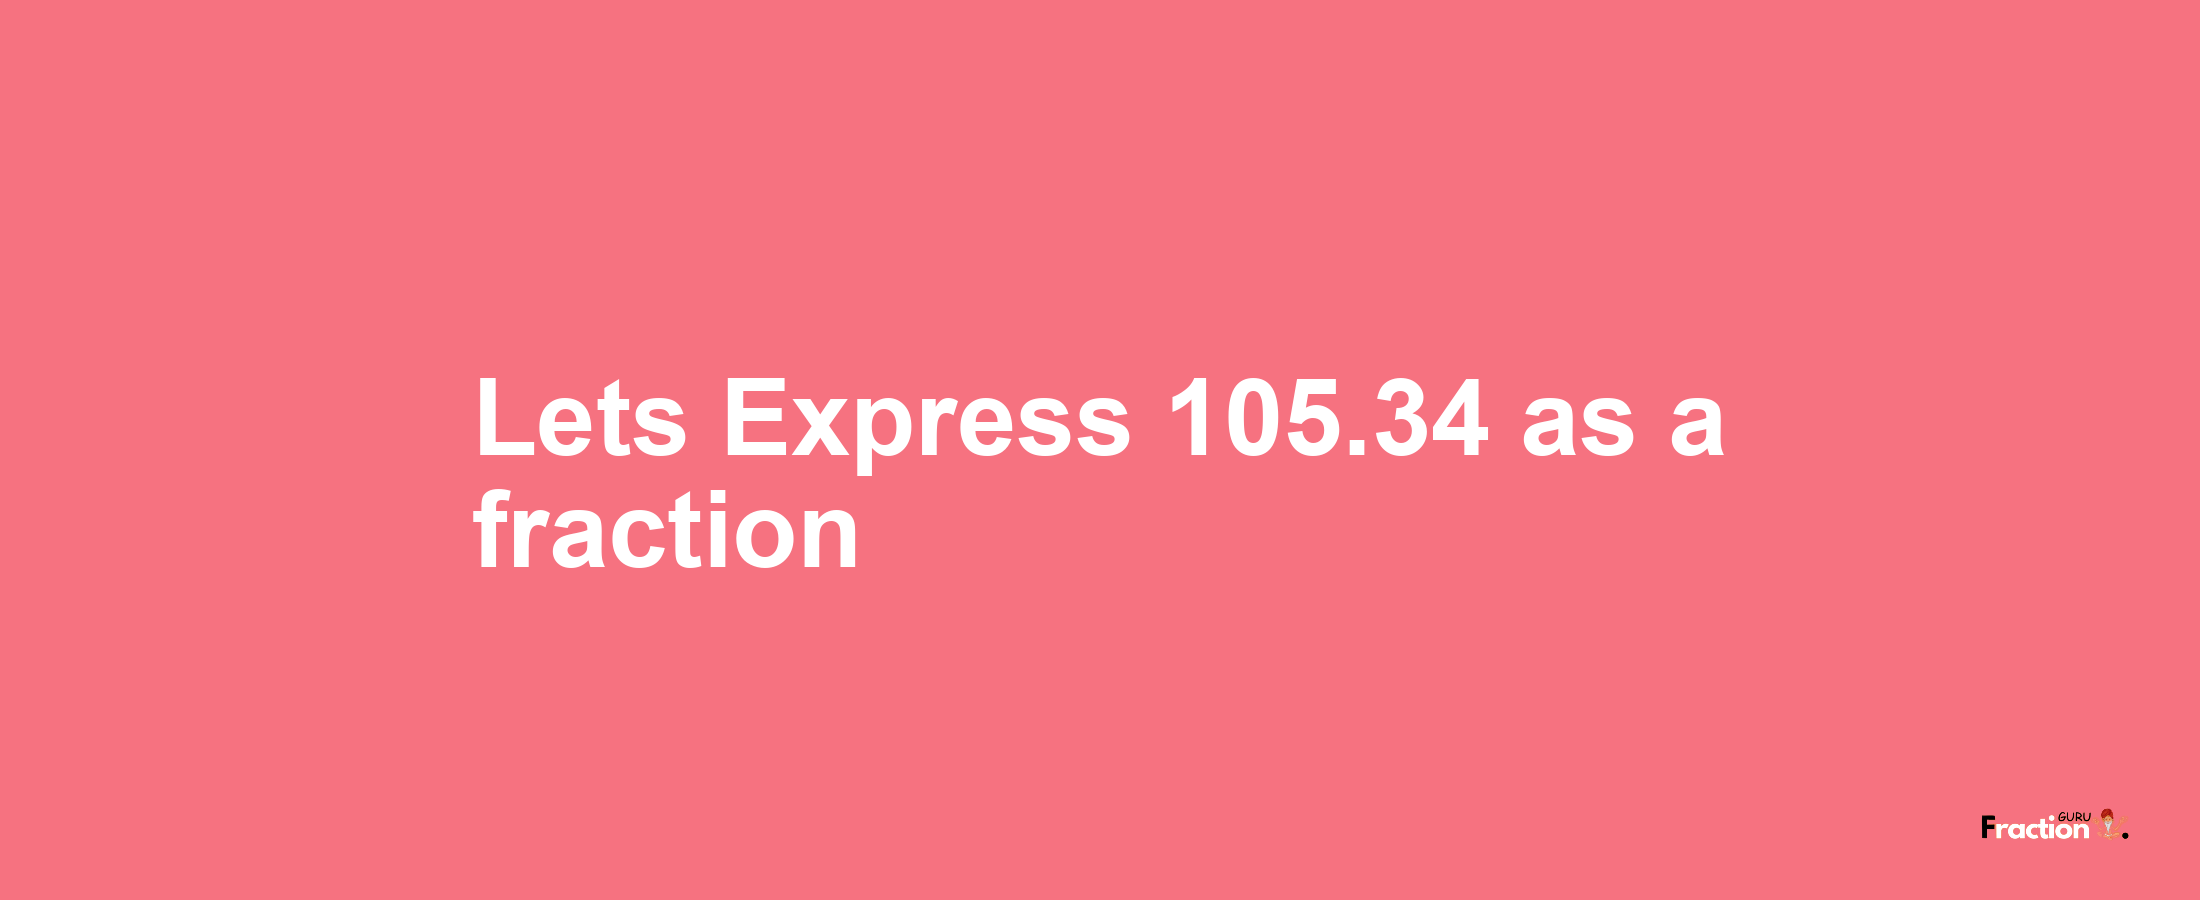 Lets Express 105.34 as afraction